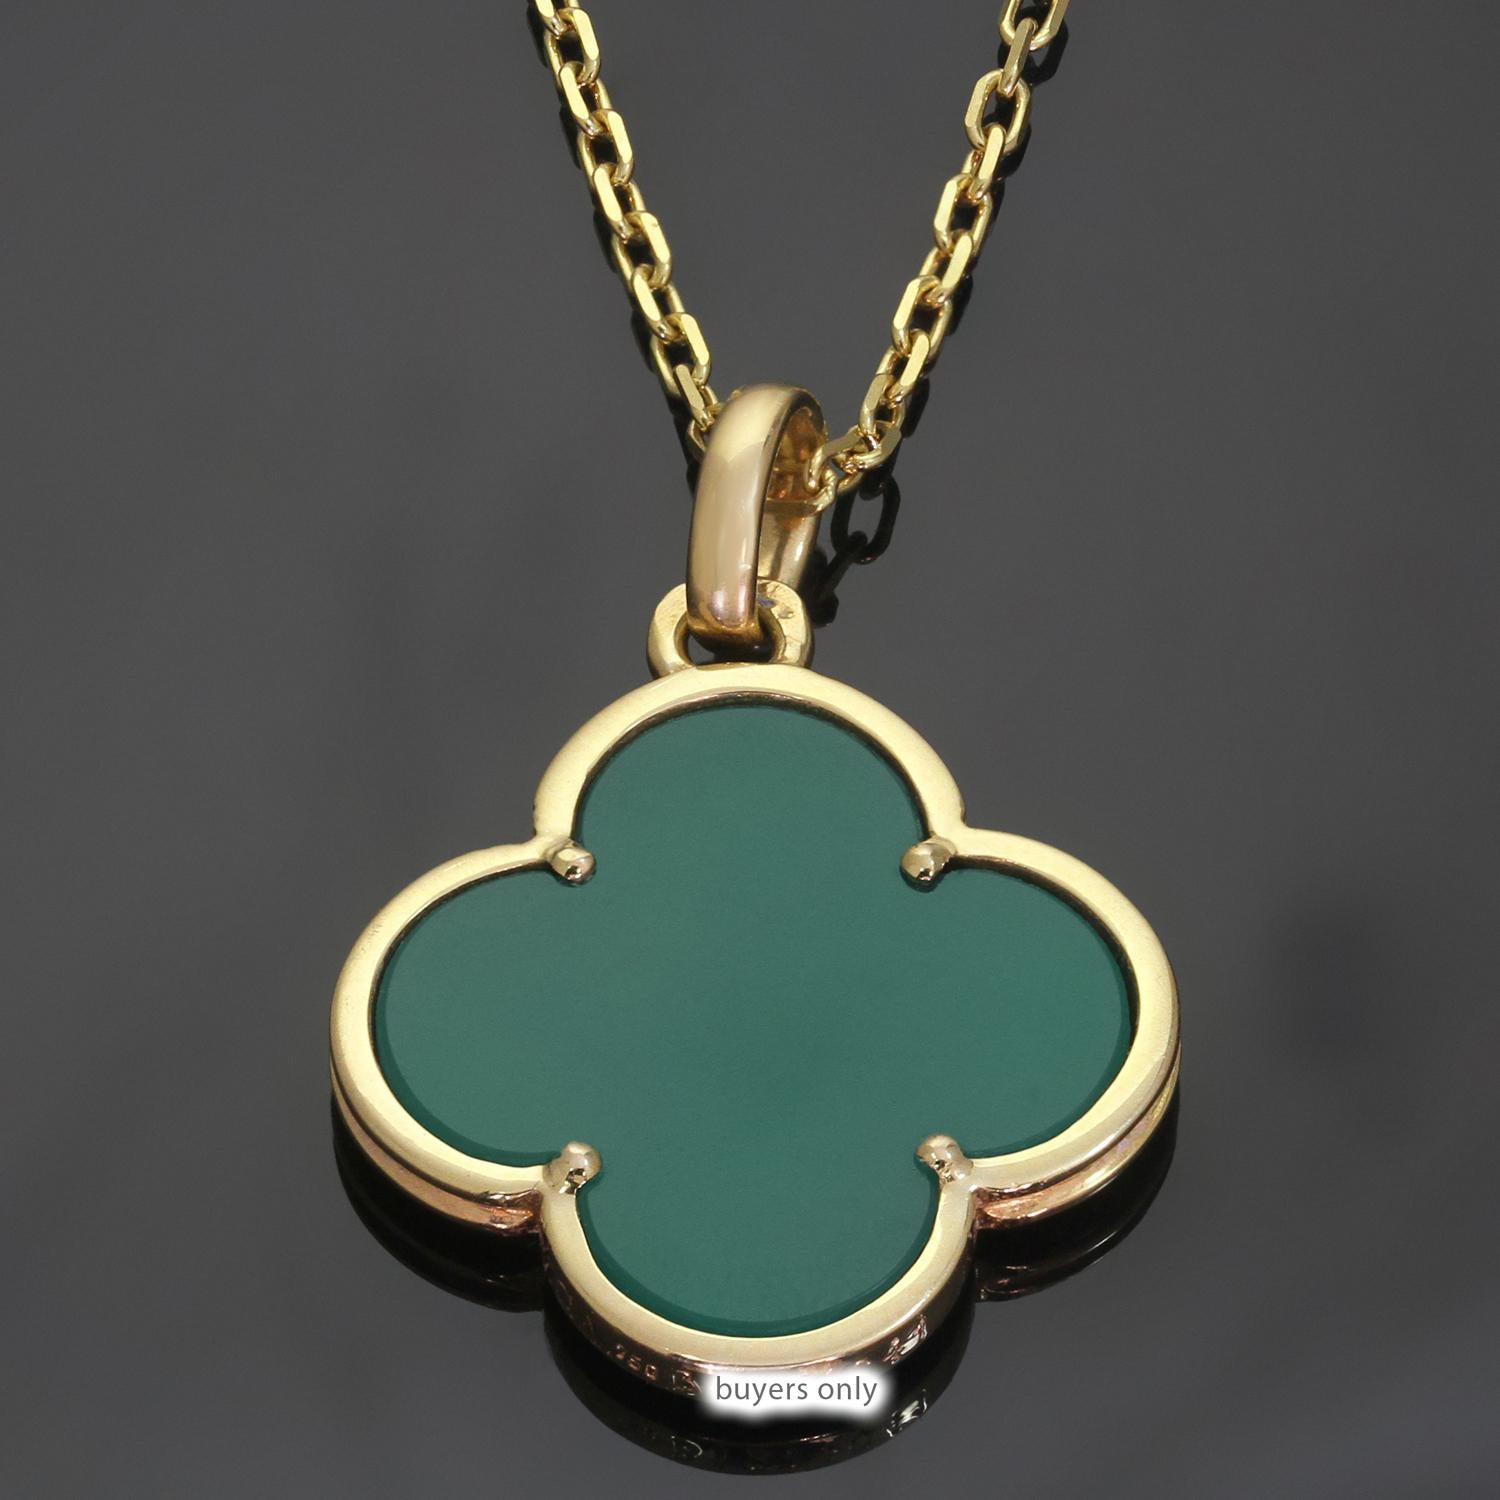 This elegant Van Cleef & Arpels necklace from the iconic Magic Alhambra collection features a classic lucky clover pendant crafted in 18k yellow gold, set with green chalcedony and completed with an adjustable length chain. Made in France circa